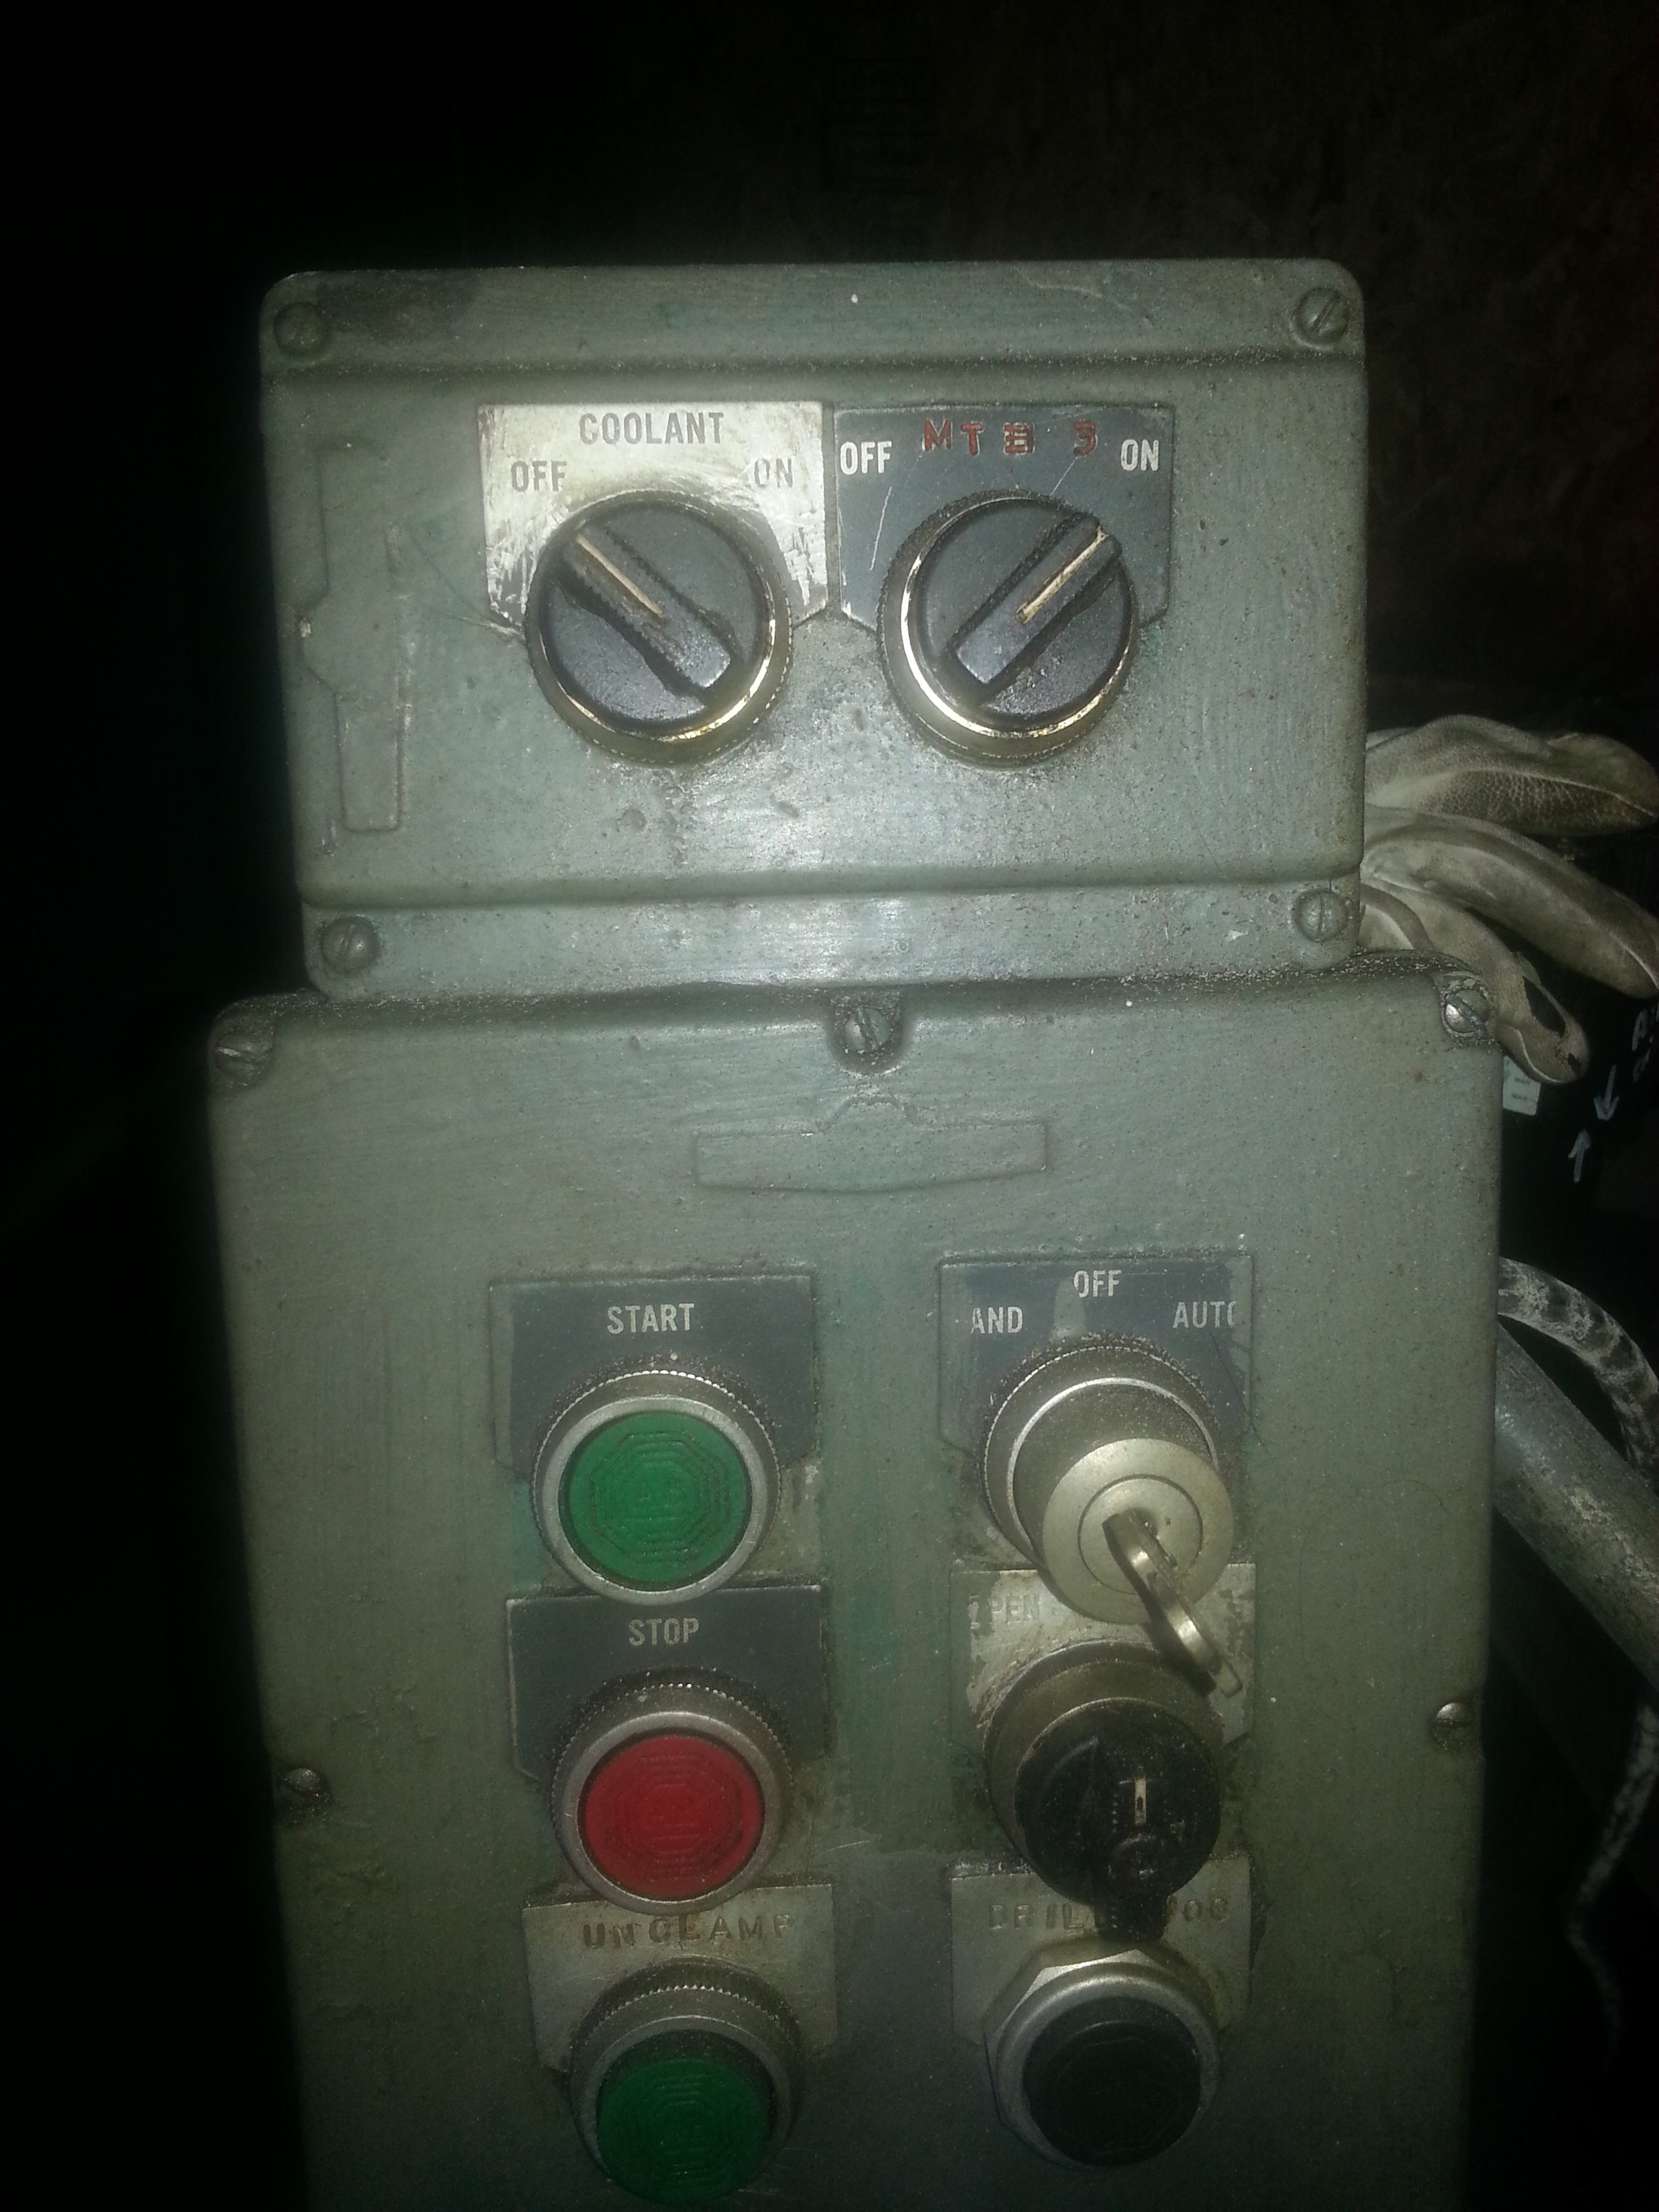 Opposed Drill and Tapping Machine For Sale